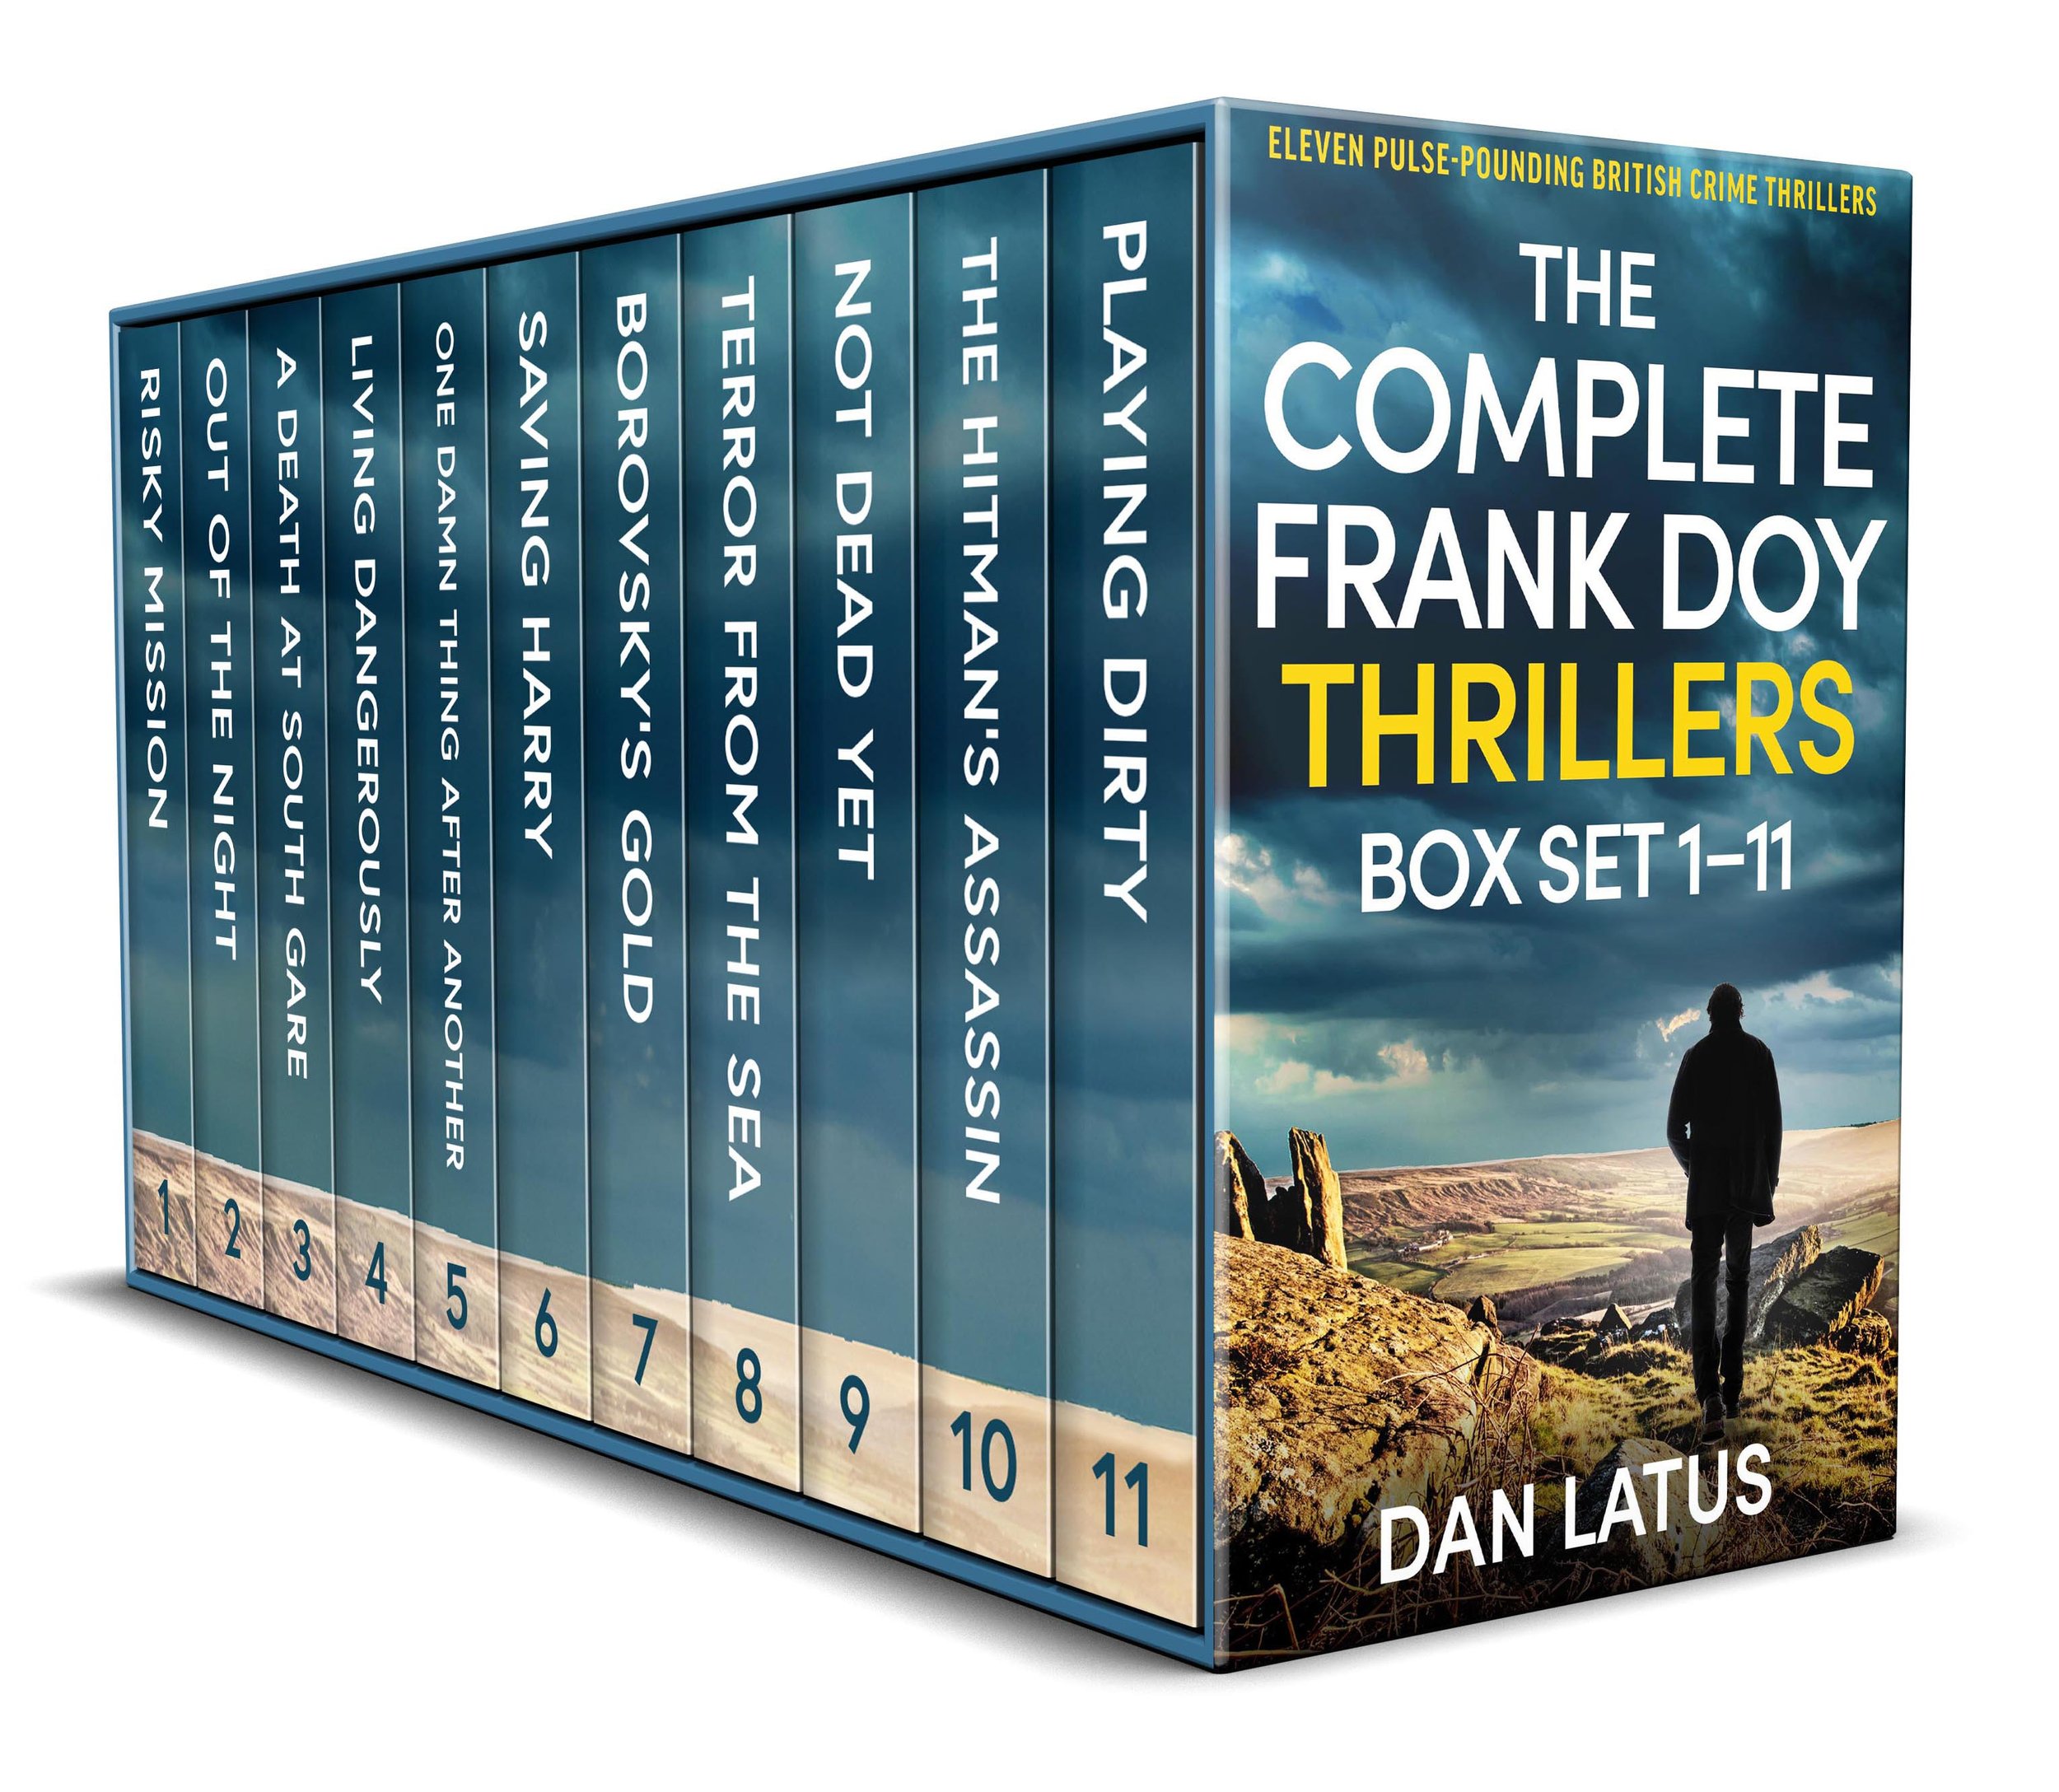 COMPLETE FRANK DOY THRILLERS BOX SET cover publish.jpg